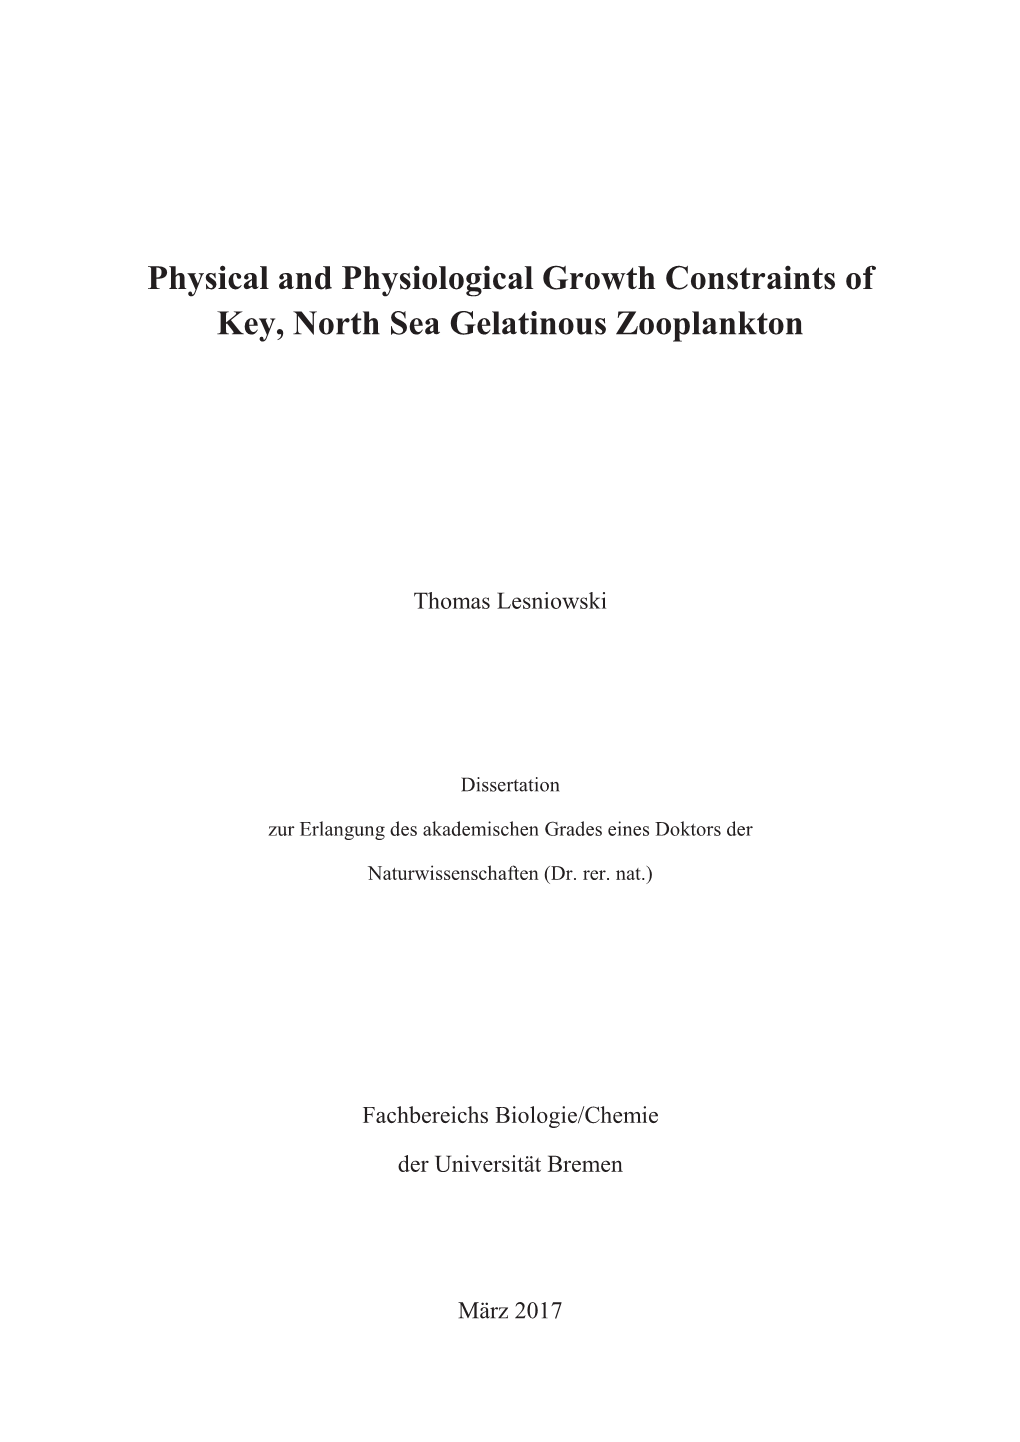 Physical and Physiological Growth Constraints of Key, North Sea Gelatinous Zooplankton